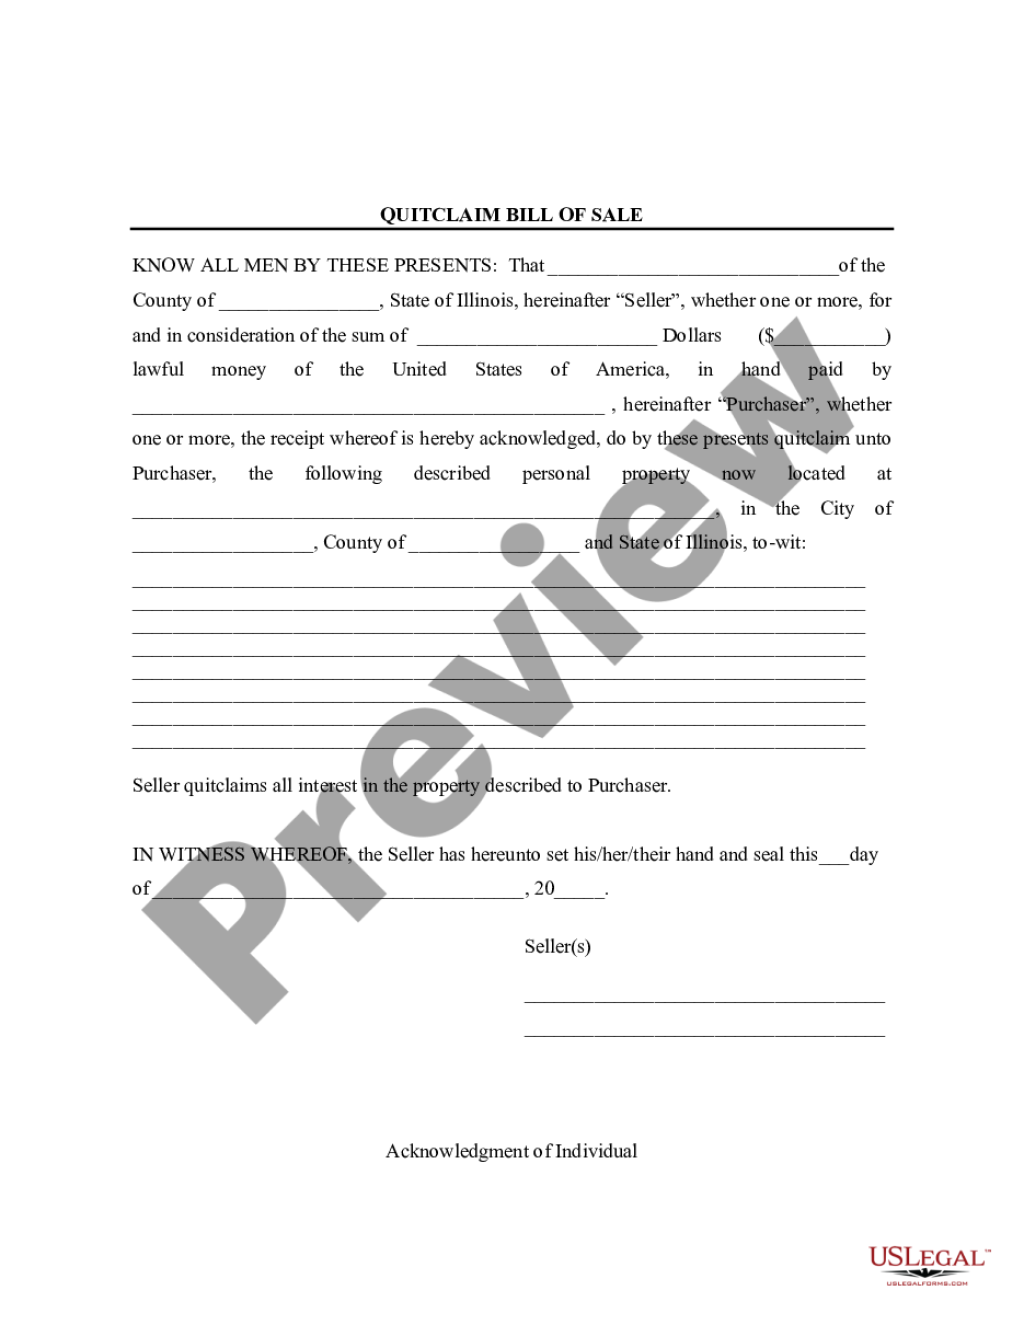 Picture of: Illinois Bill of Sale without Warranty by Individual Seller